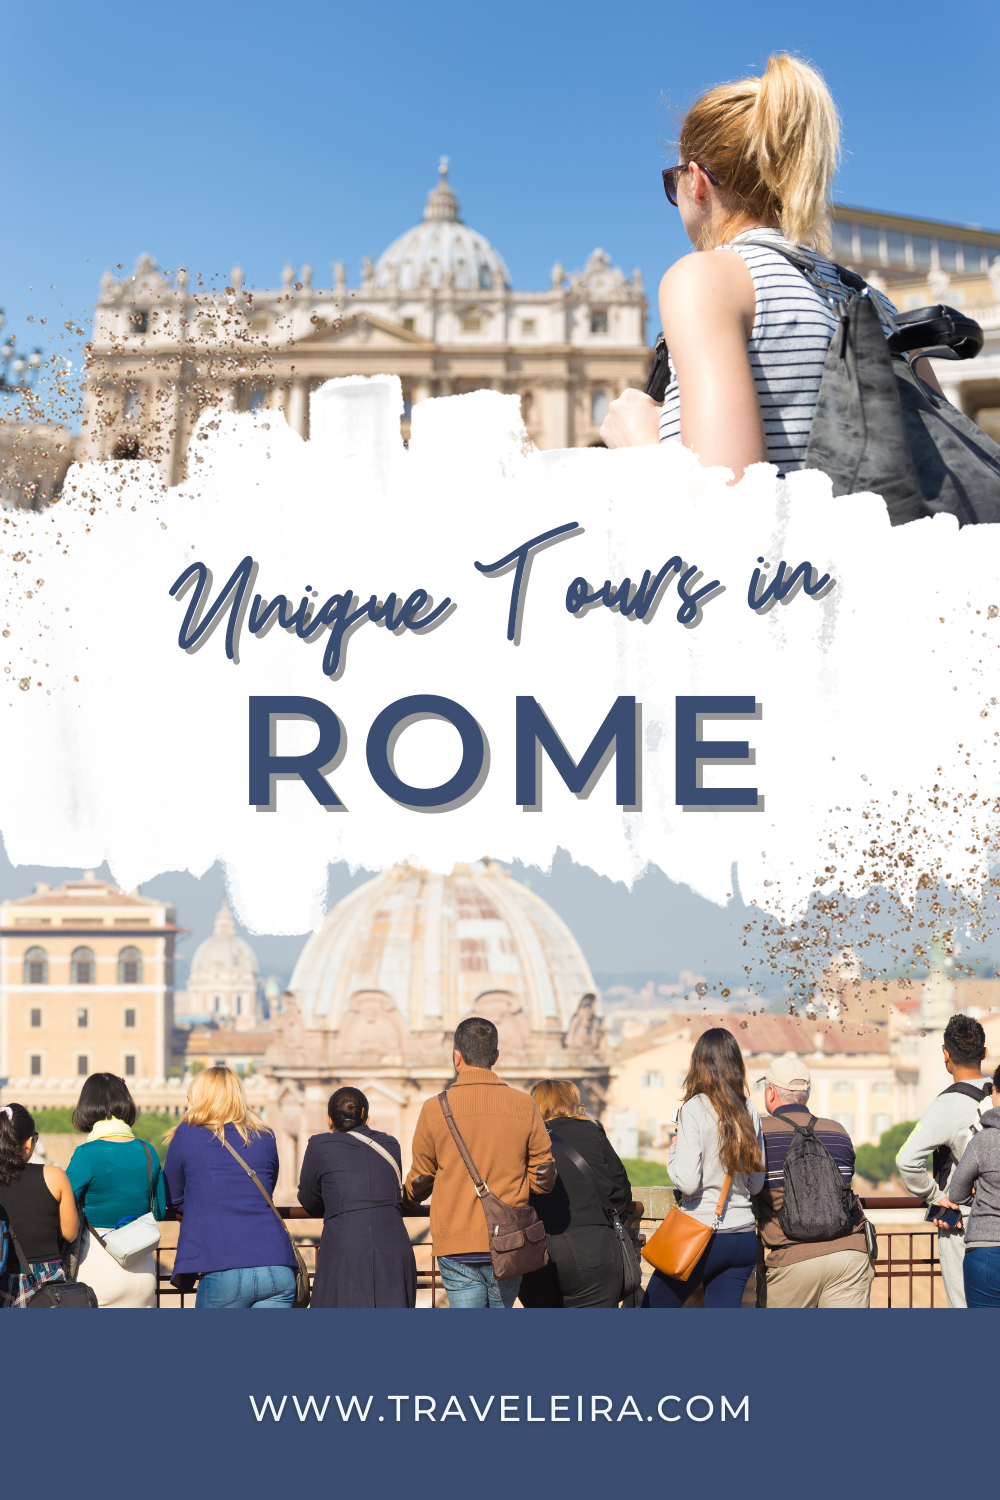 Find one of the unique tours in Rome for your trip to the eternal city. Join one of these breathtaking experiences in Rome.